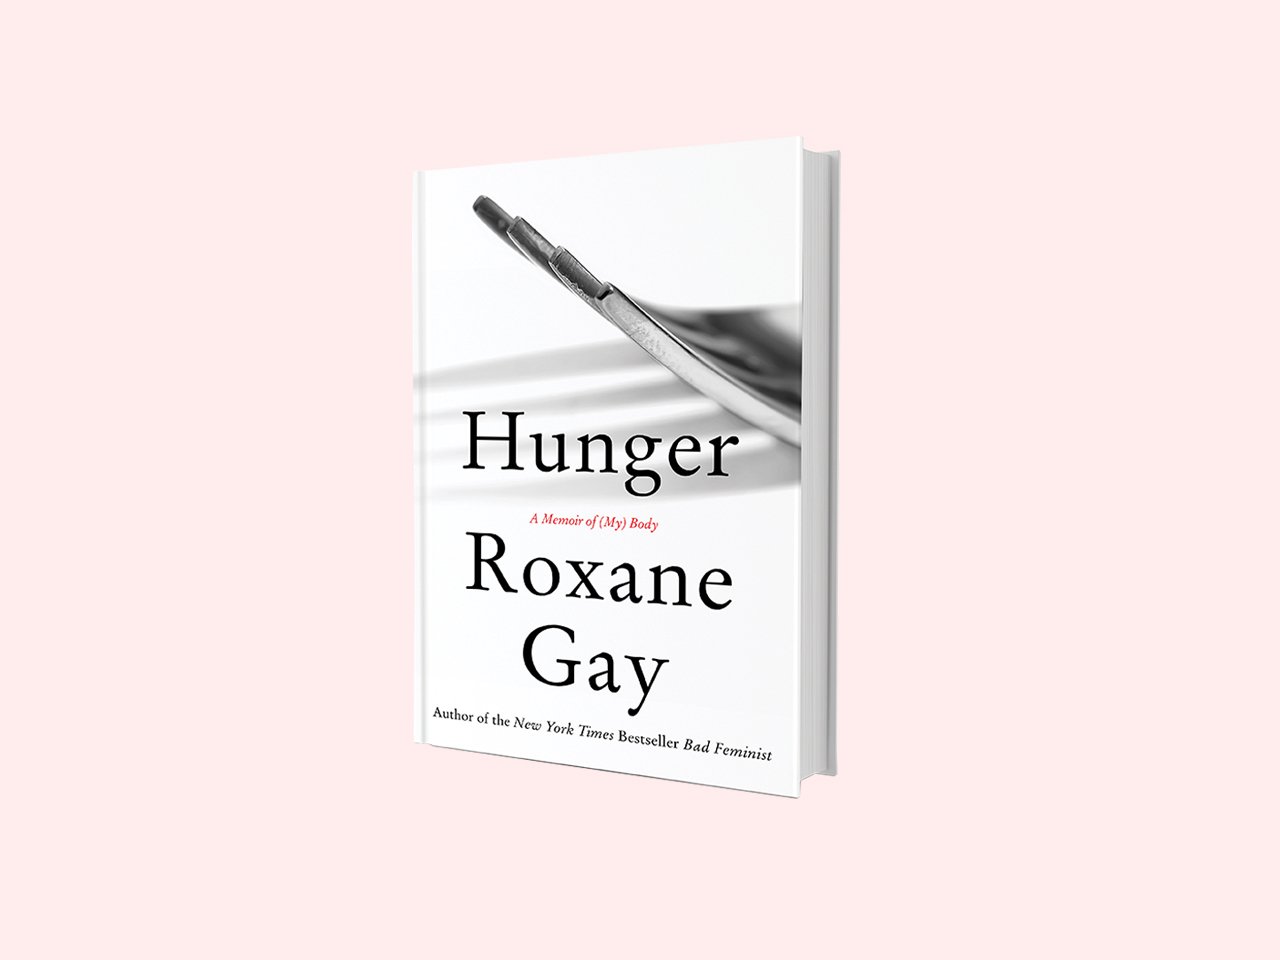 'This is my truth': Roxane Gay's hard look at her body